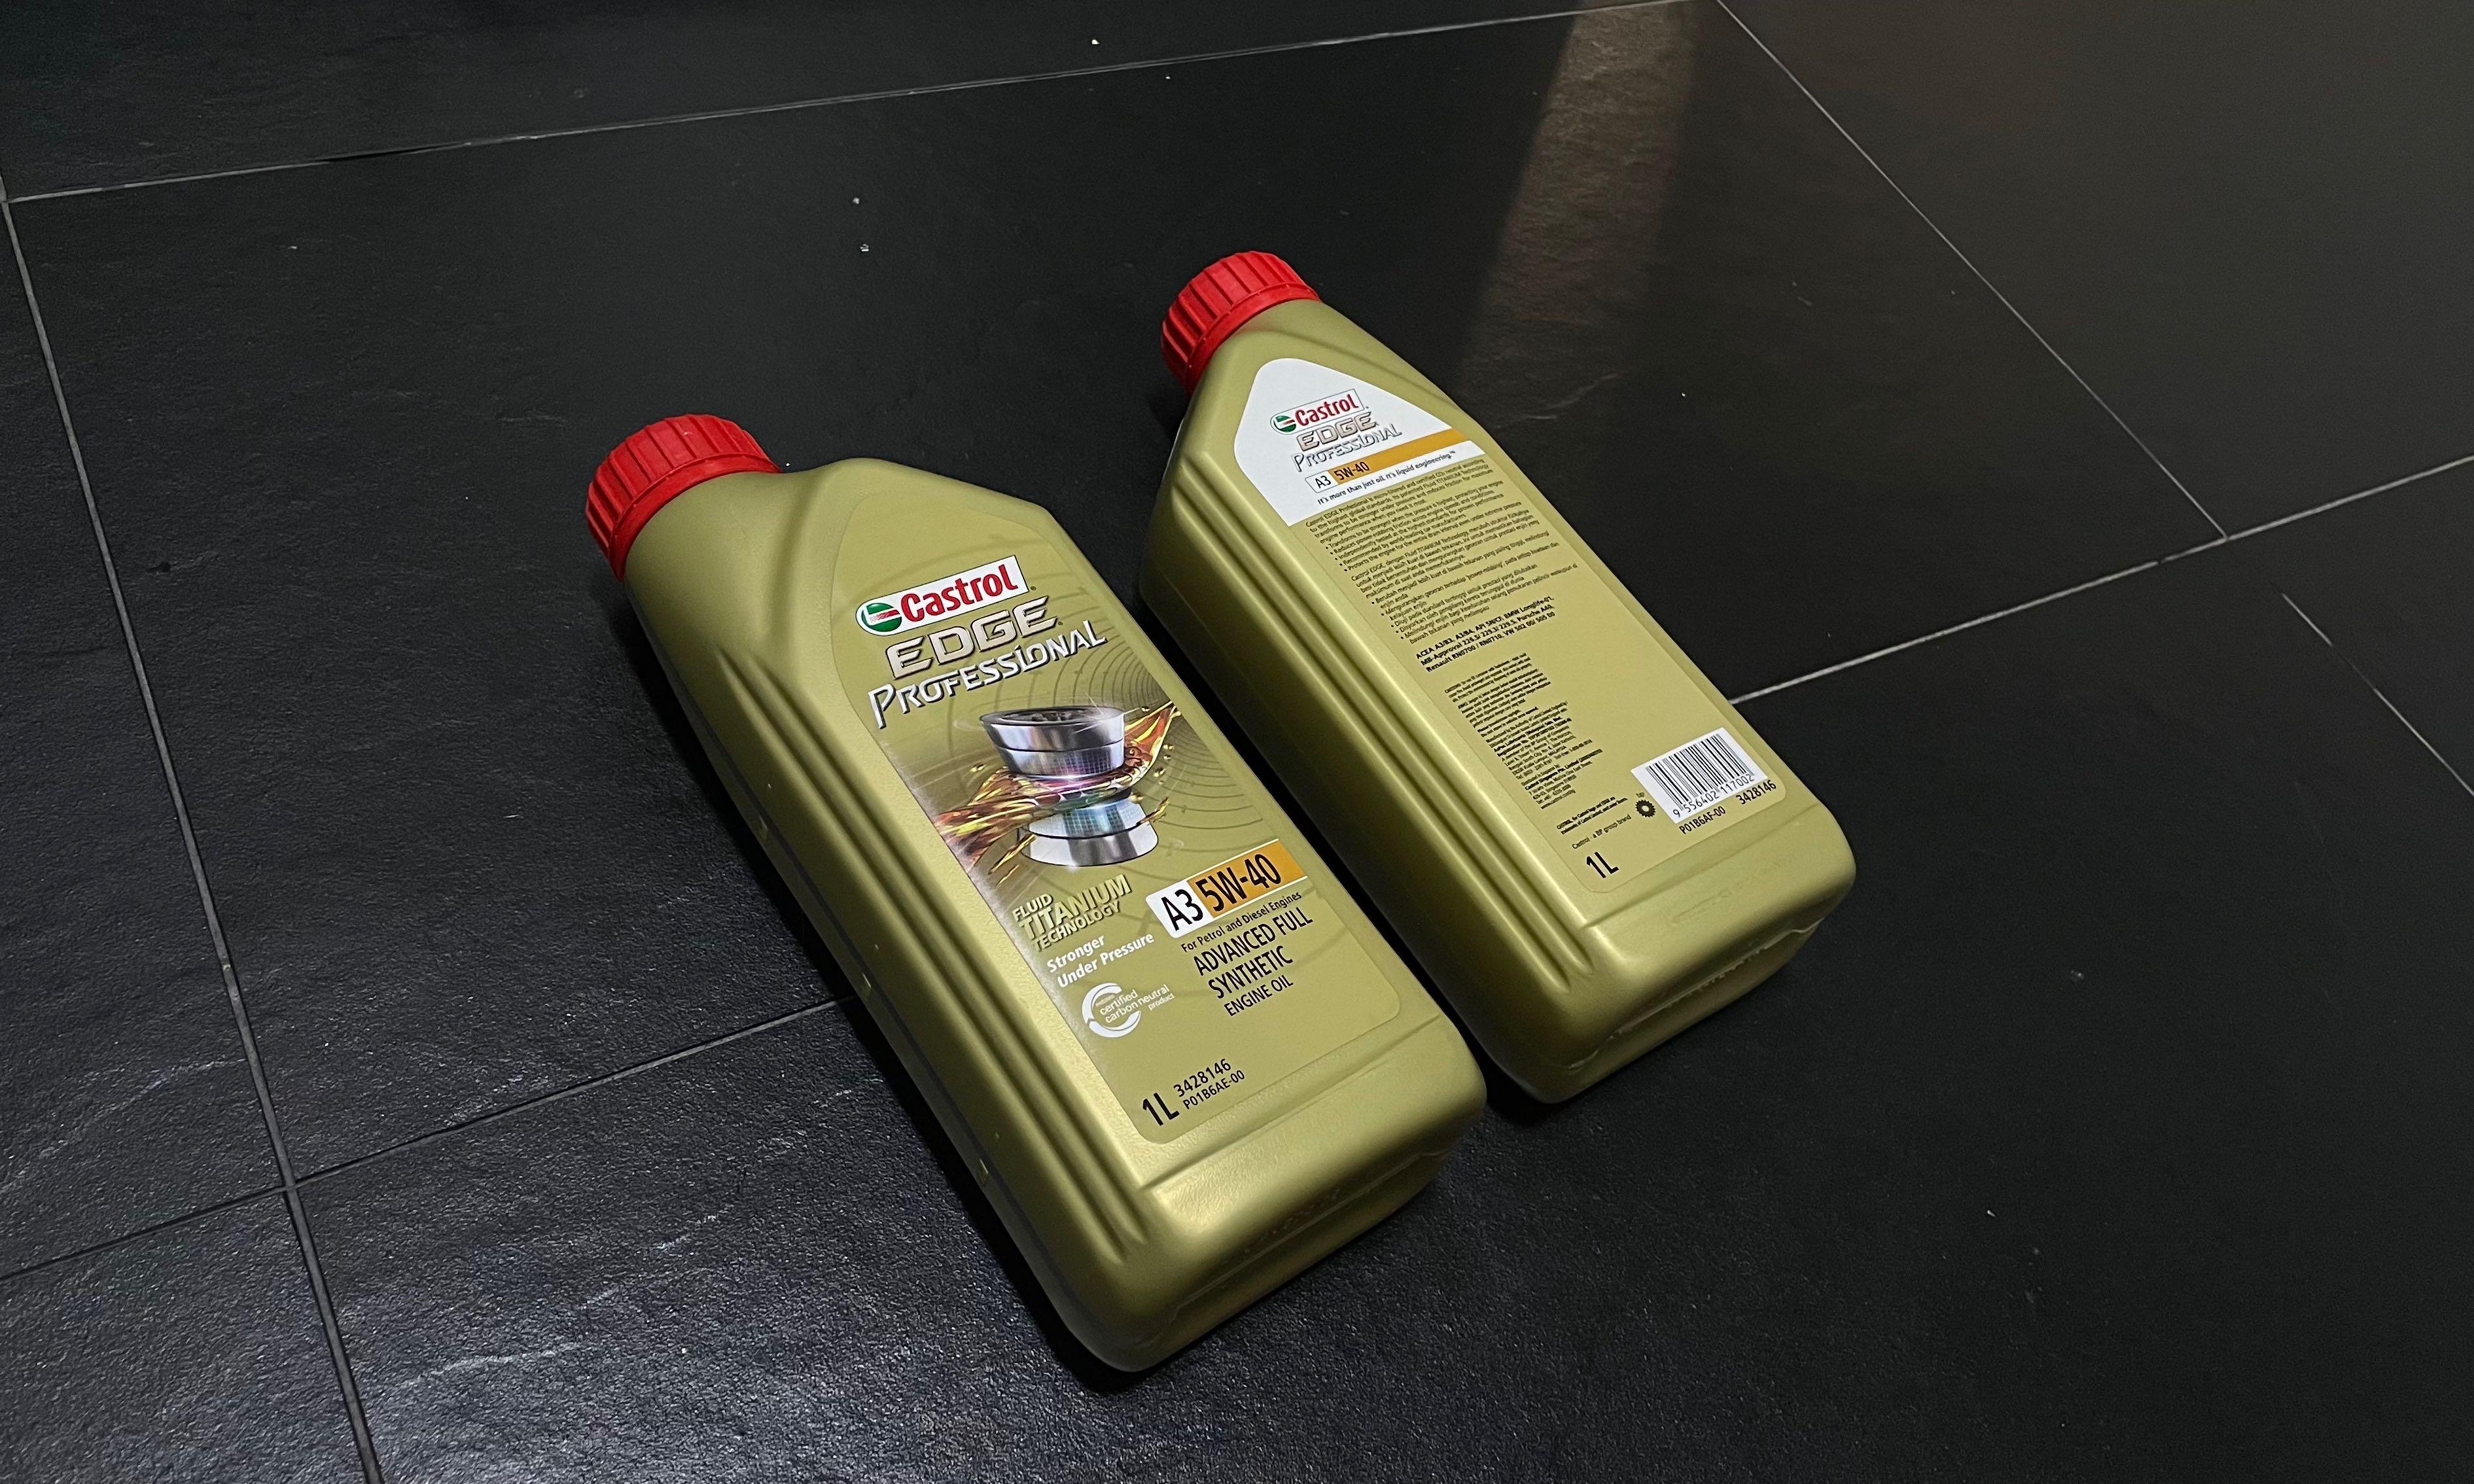 A3 CASTROL EDGE PROFESSIONAL FST ENGINE OIL 1L 5W40 5W-40 BATCH 2021 JUNE  MADE IN MALAYSIA , Car Accessories, Car Workshops & Services on Carousell